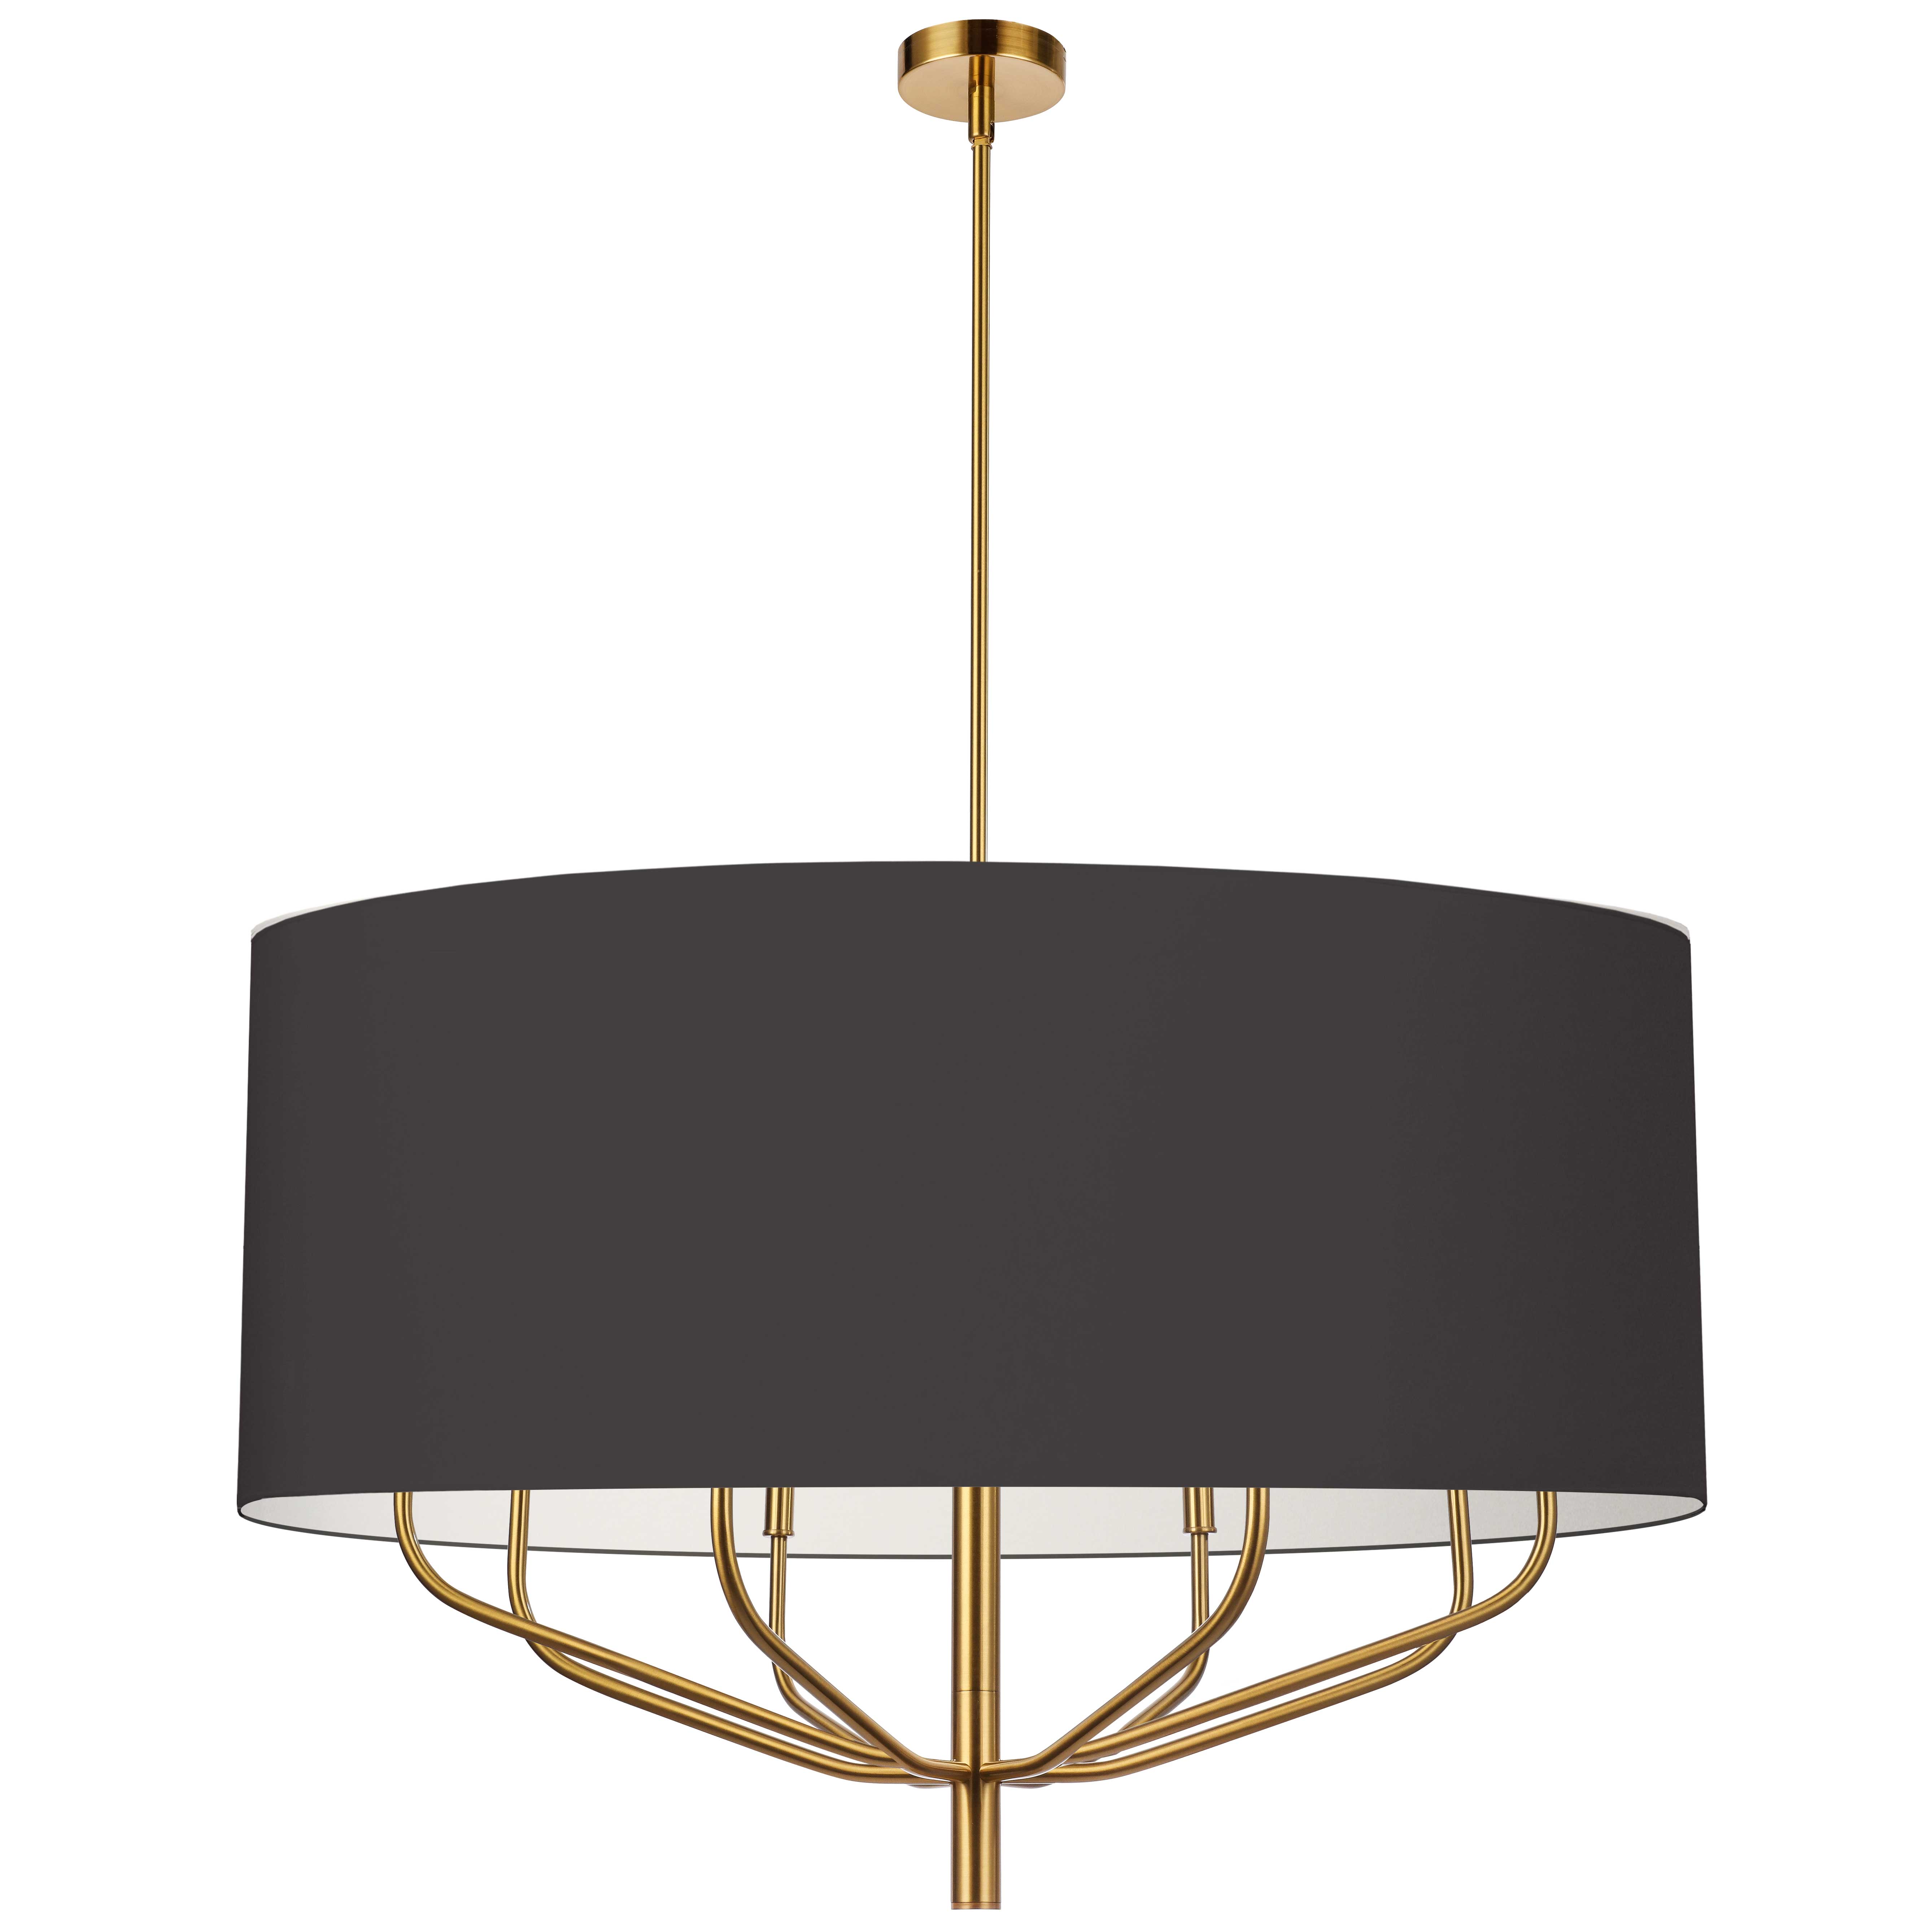 8 Light Incandescent Chandelier, Aged Brass with Black Shade